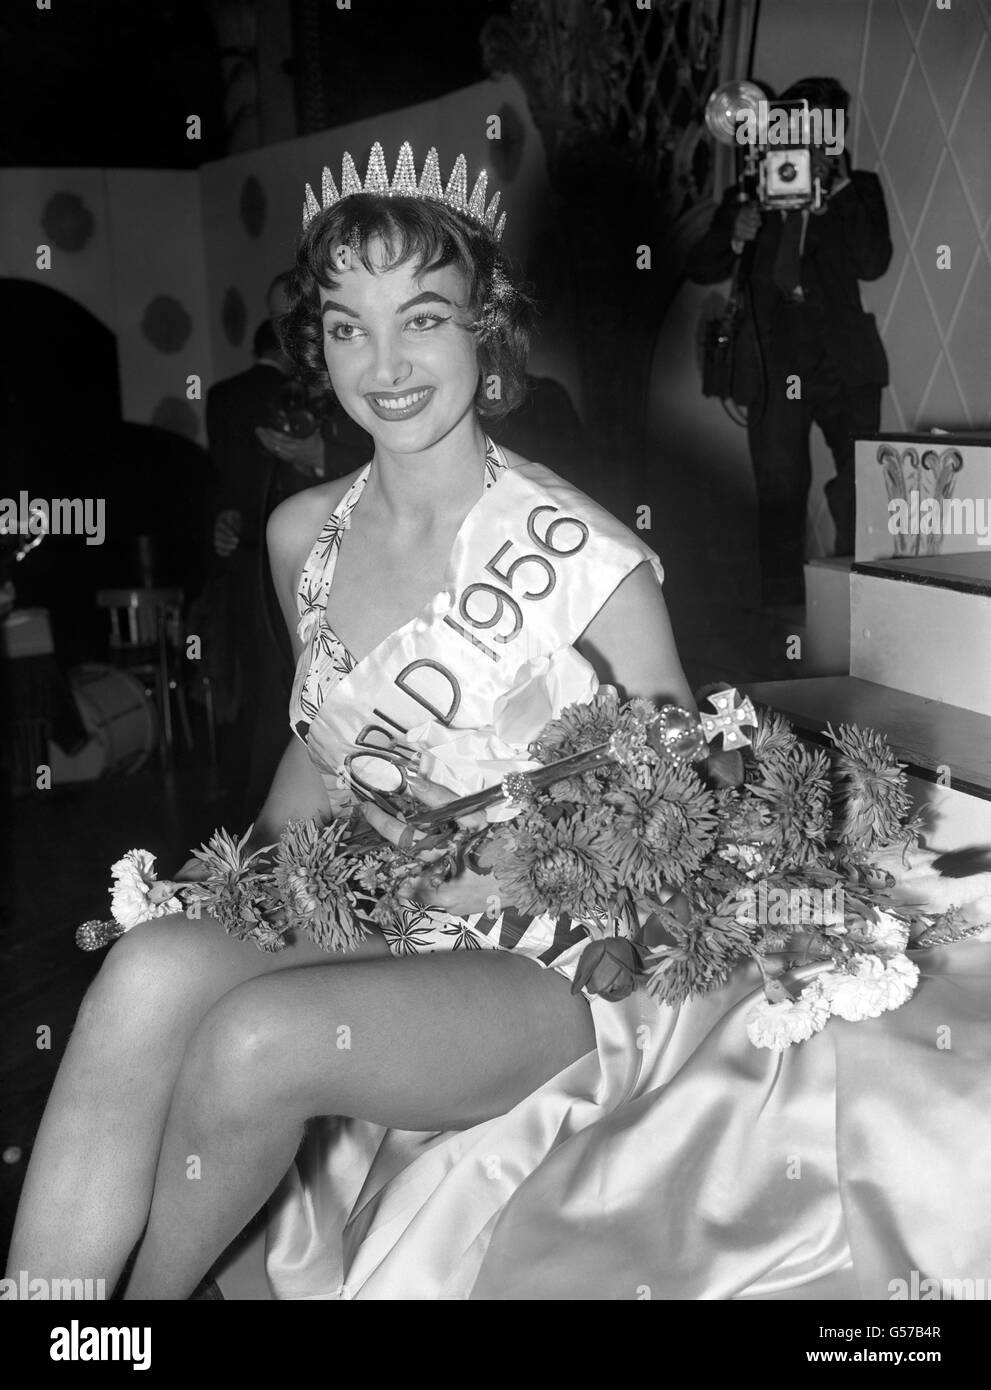 MISS WORLD 1956: Brunette Petra Schurmann, Miss Germany, wearing the victory sash after winning the title Miss World 1956 at the final held at the Lyceum, Strand, London. Petra, 23, is a student and model with ambitions to become an actress. Stock Photo